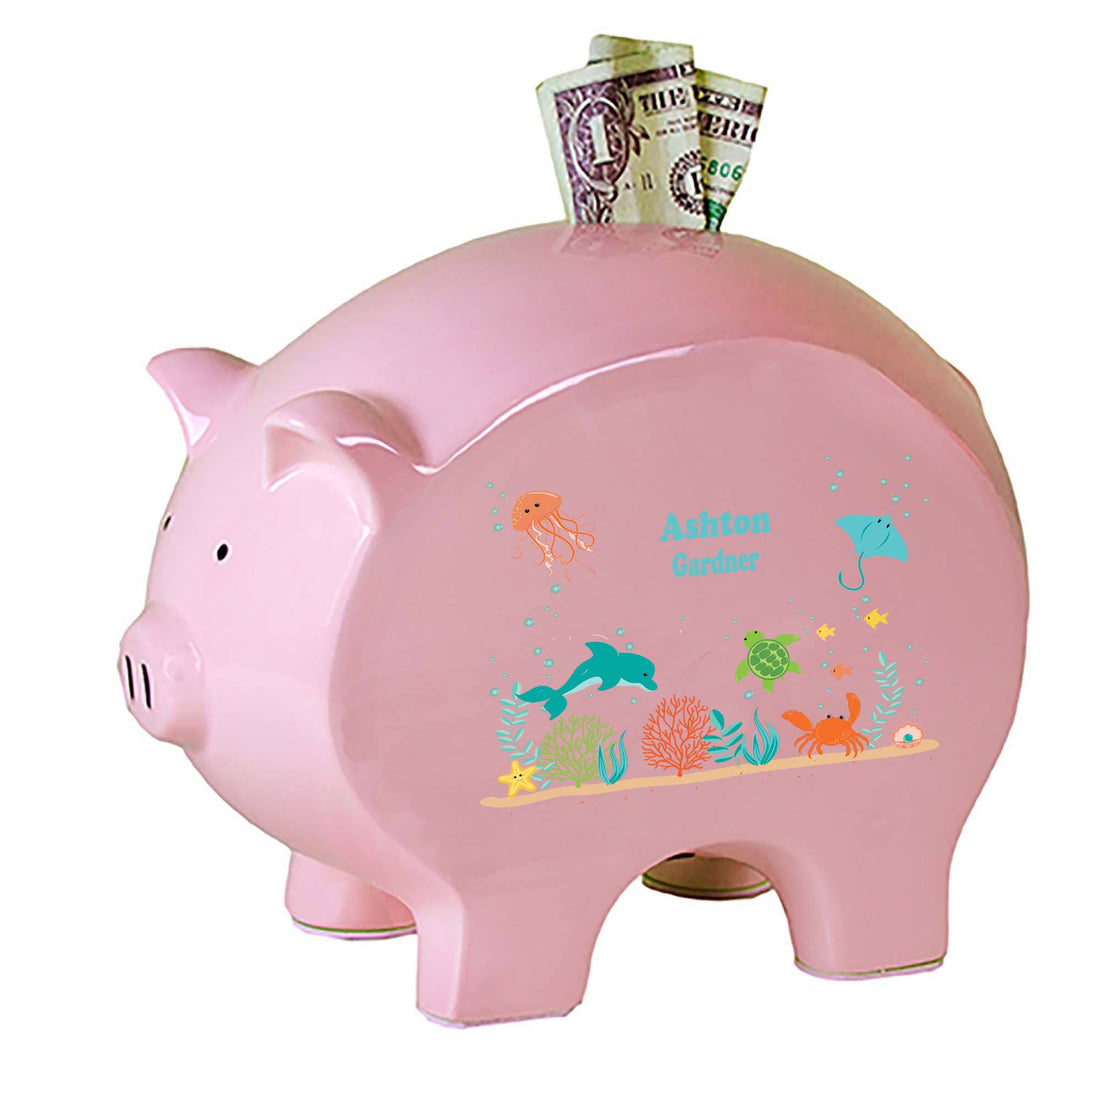 Personalized Pink Piggy Bank with Sea and Marine design